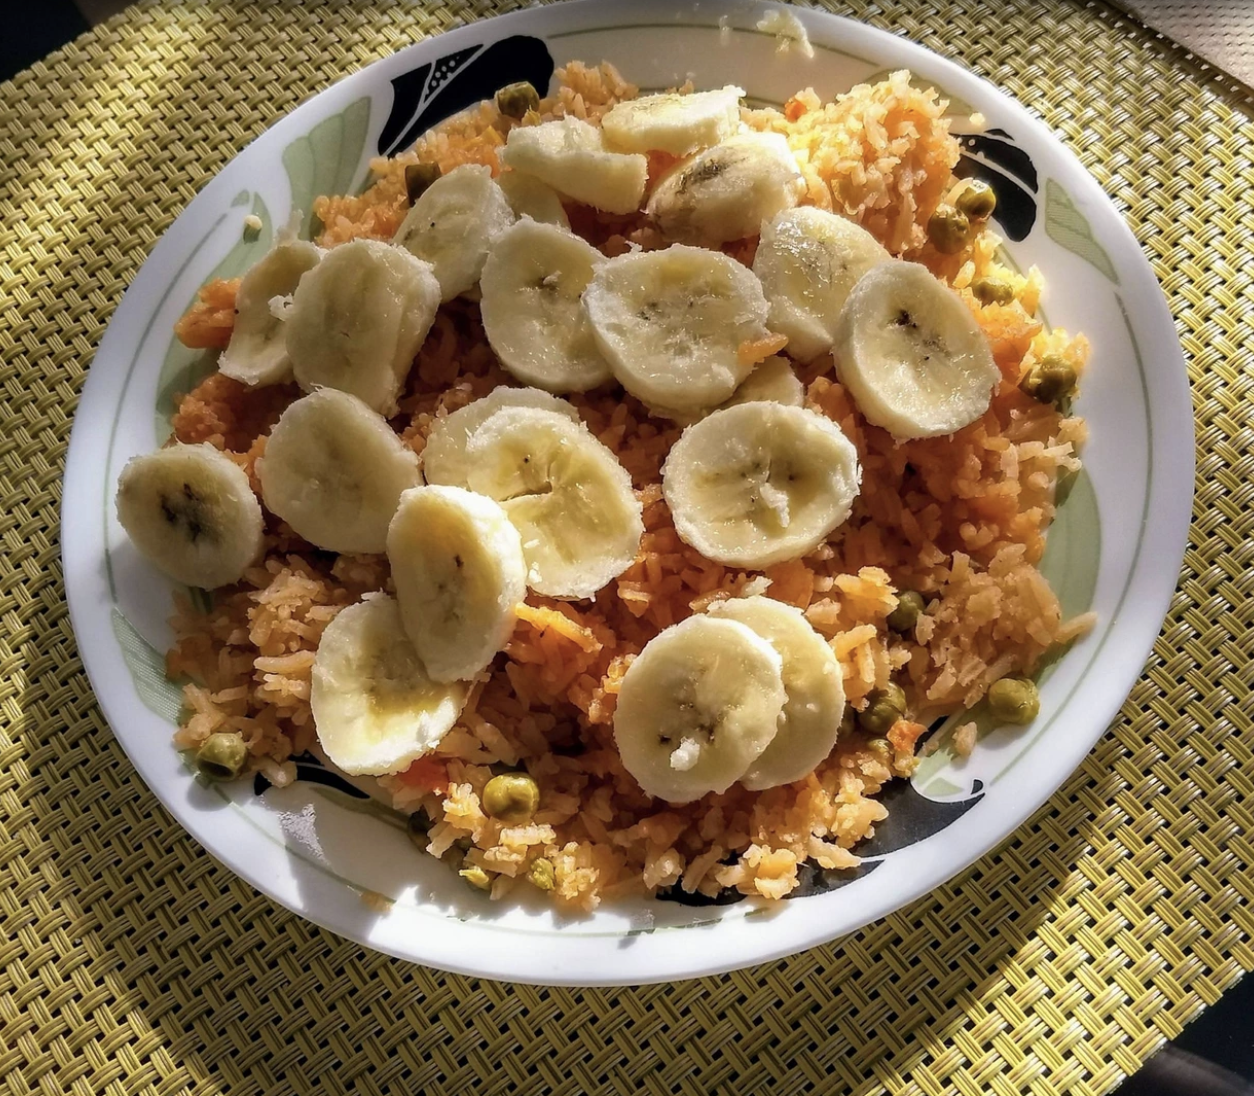 Mexican red rice with sliced banana.